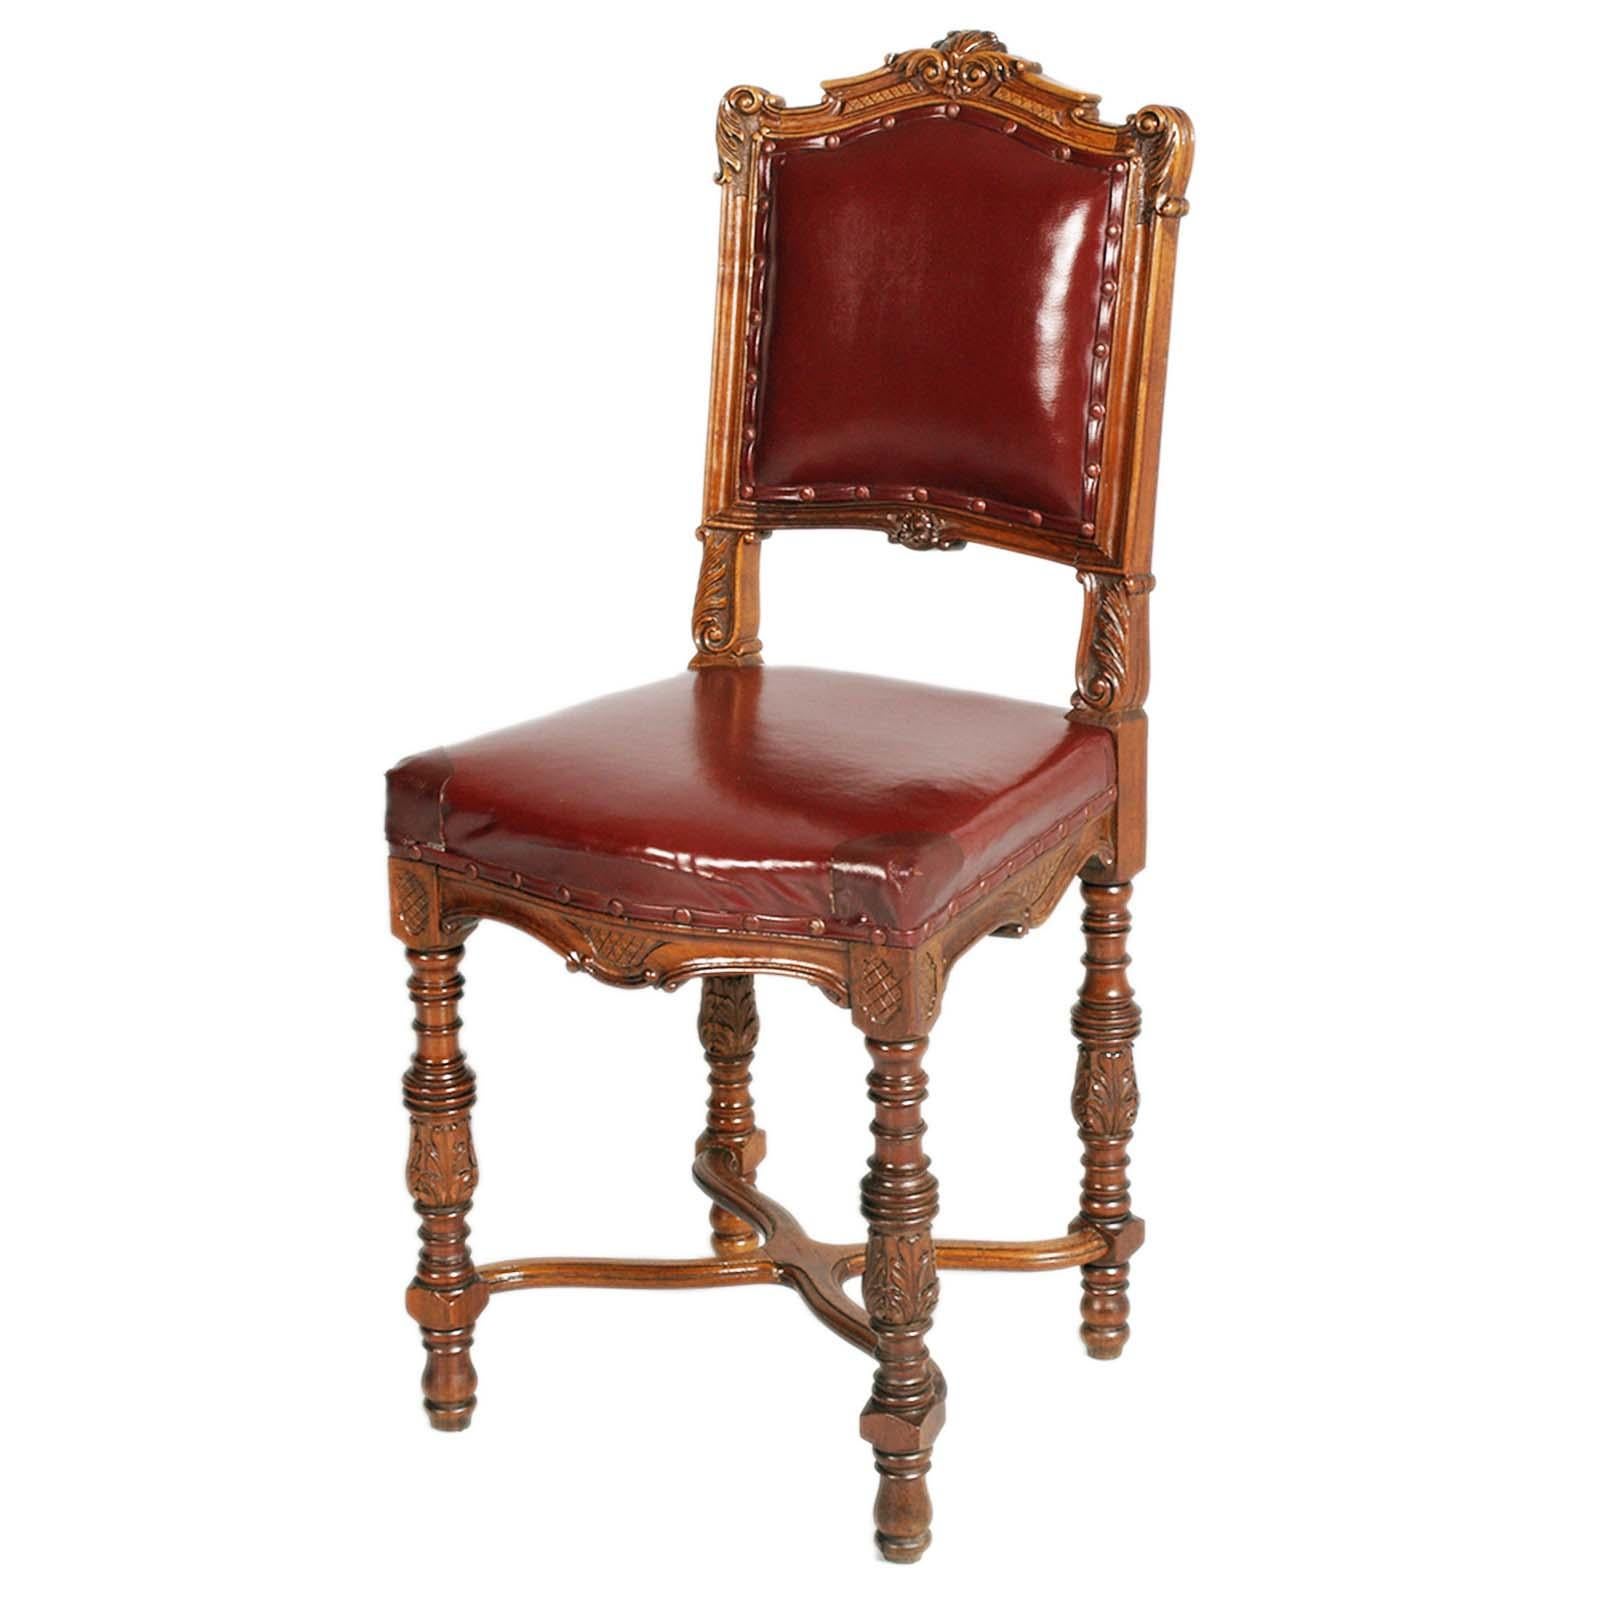 Neoclassical 1880s Italian Chairs Neoclassic Eclectic Hand Carved Walnut Leather Upholstered For Sale